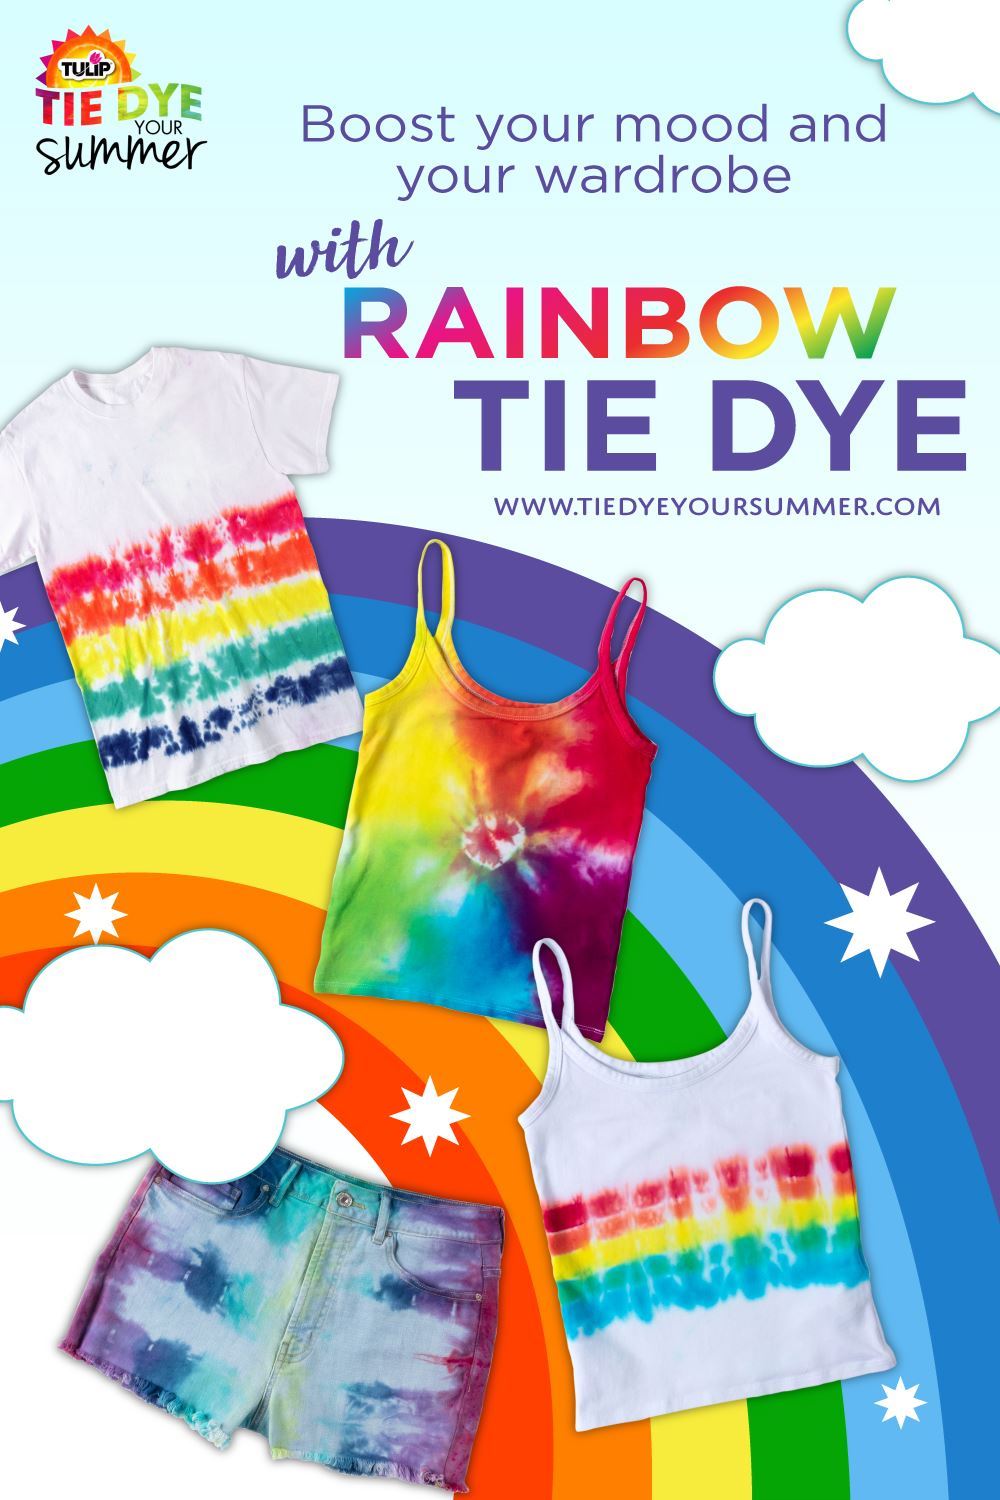 Rainbow Tie Dye Projects To Brighten Your Day | Tie Dye Your Summer